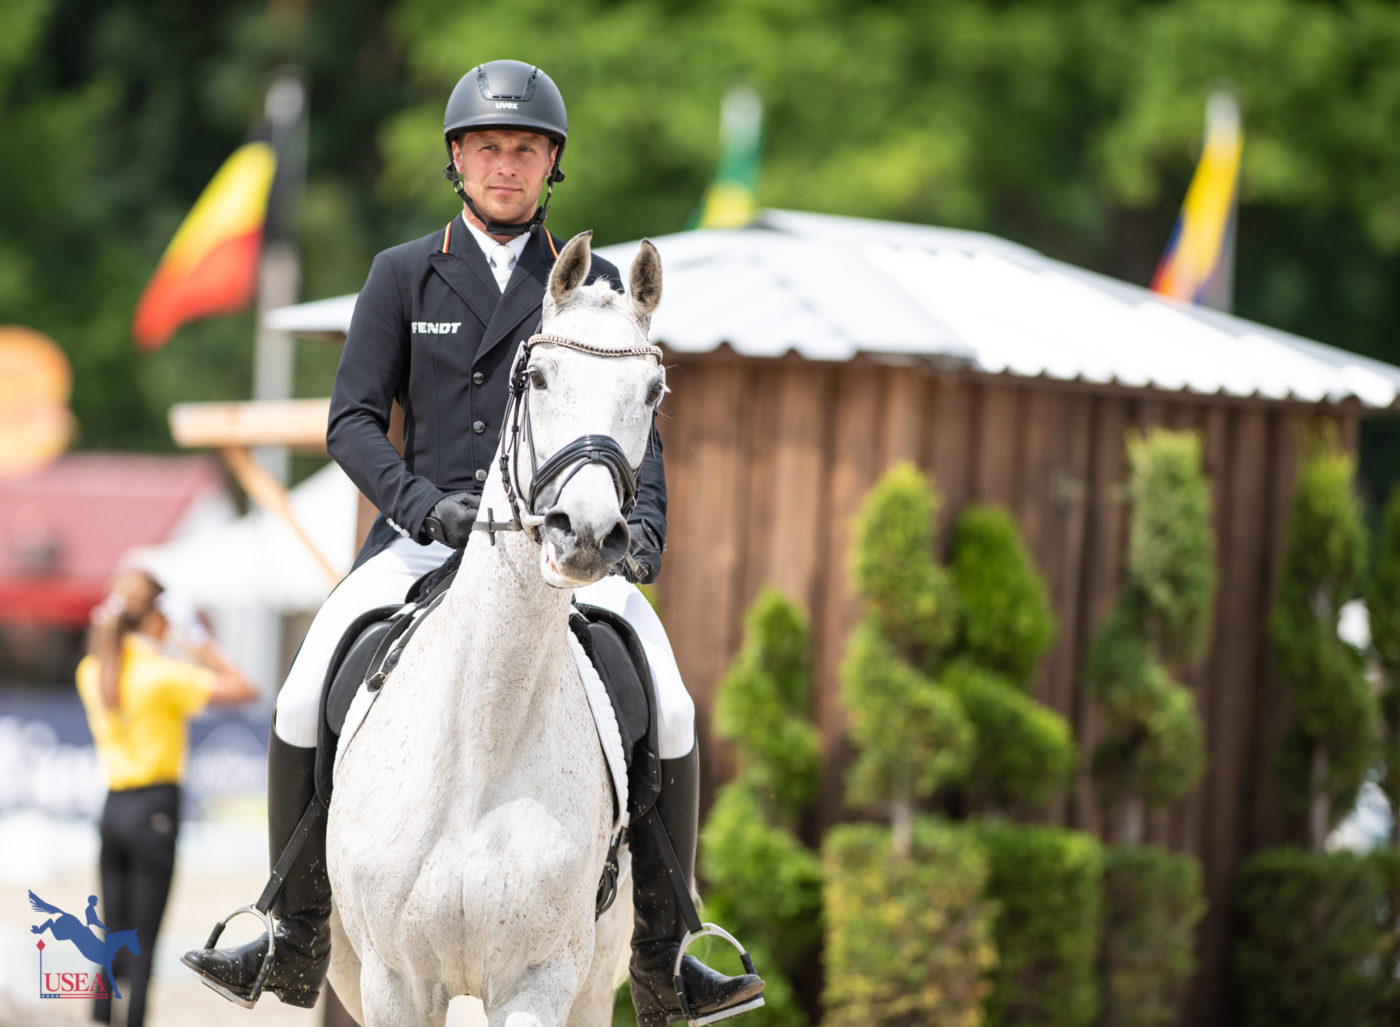 Germany's Arne Bergendahl and Luthien 3 jig out of the arena after their ride. USEA/Lindsay Berreth photo